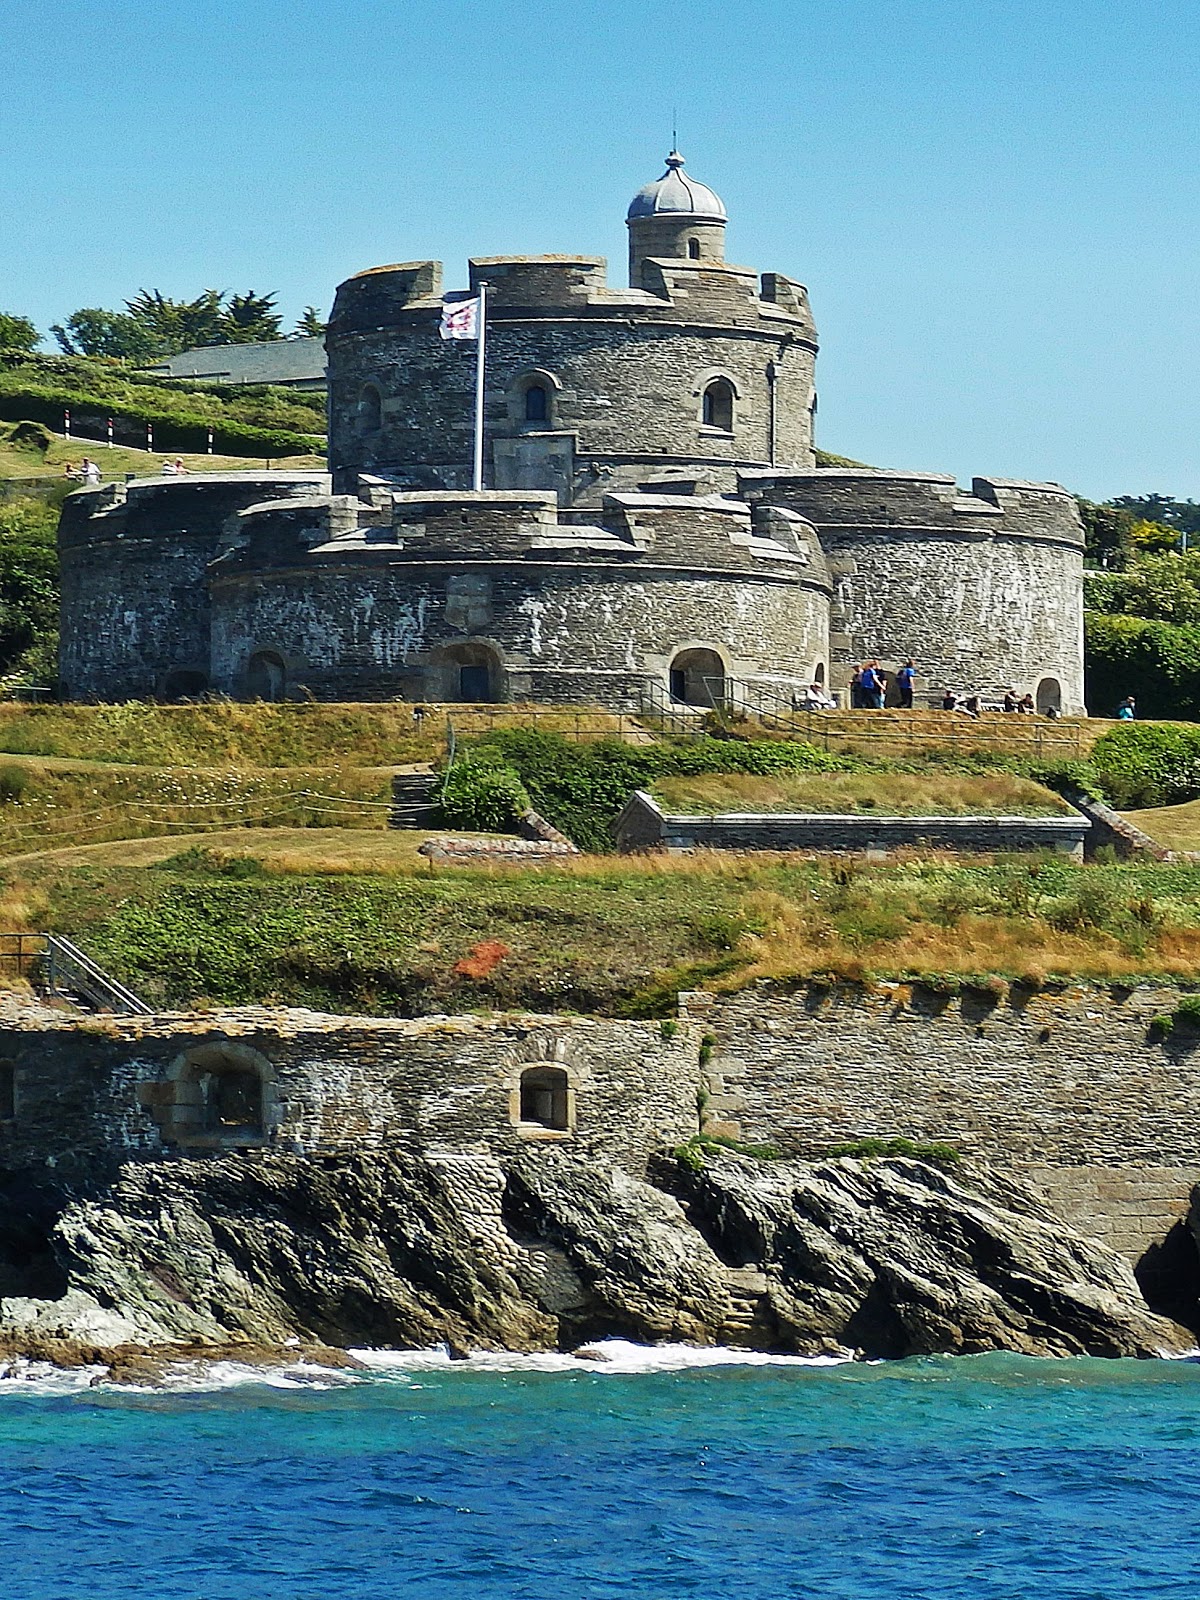 Mike's Cornwall: St. Mawes Town and Castle By Boat